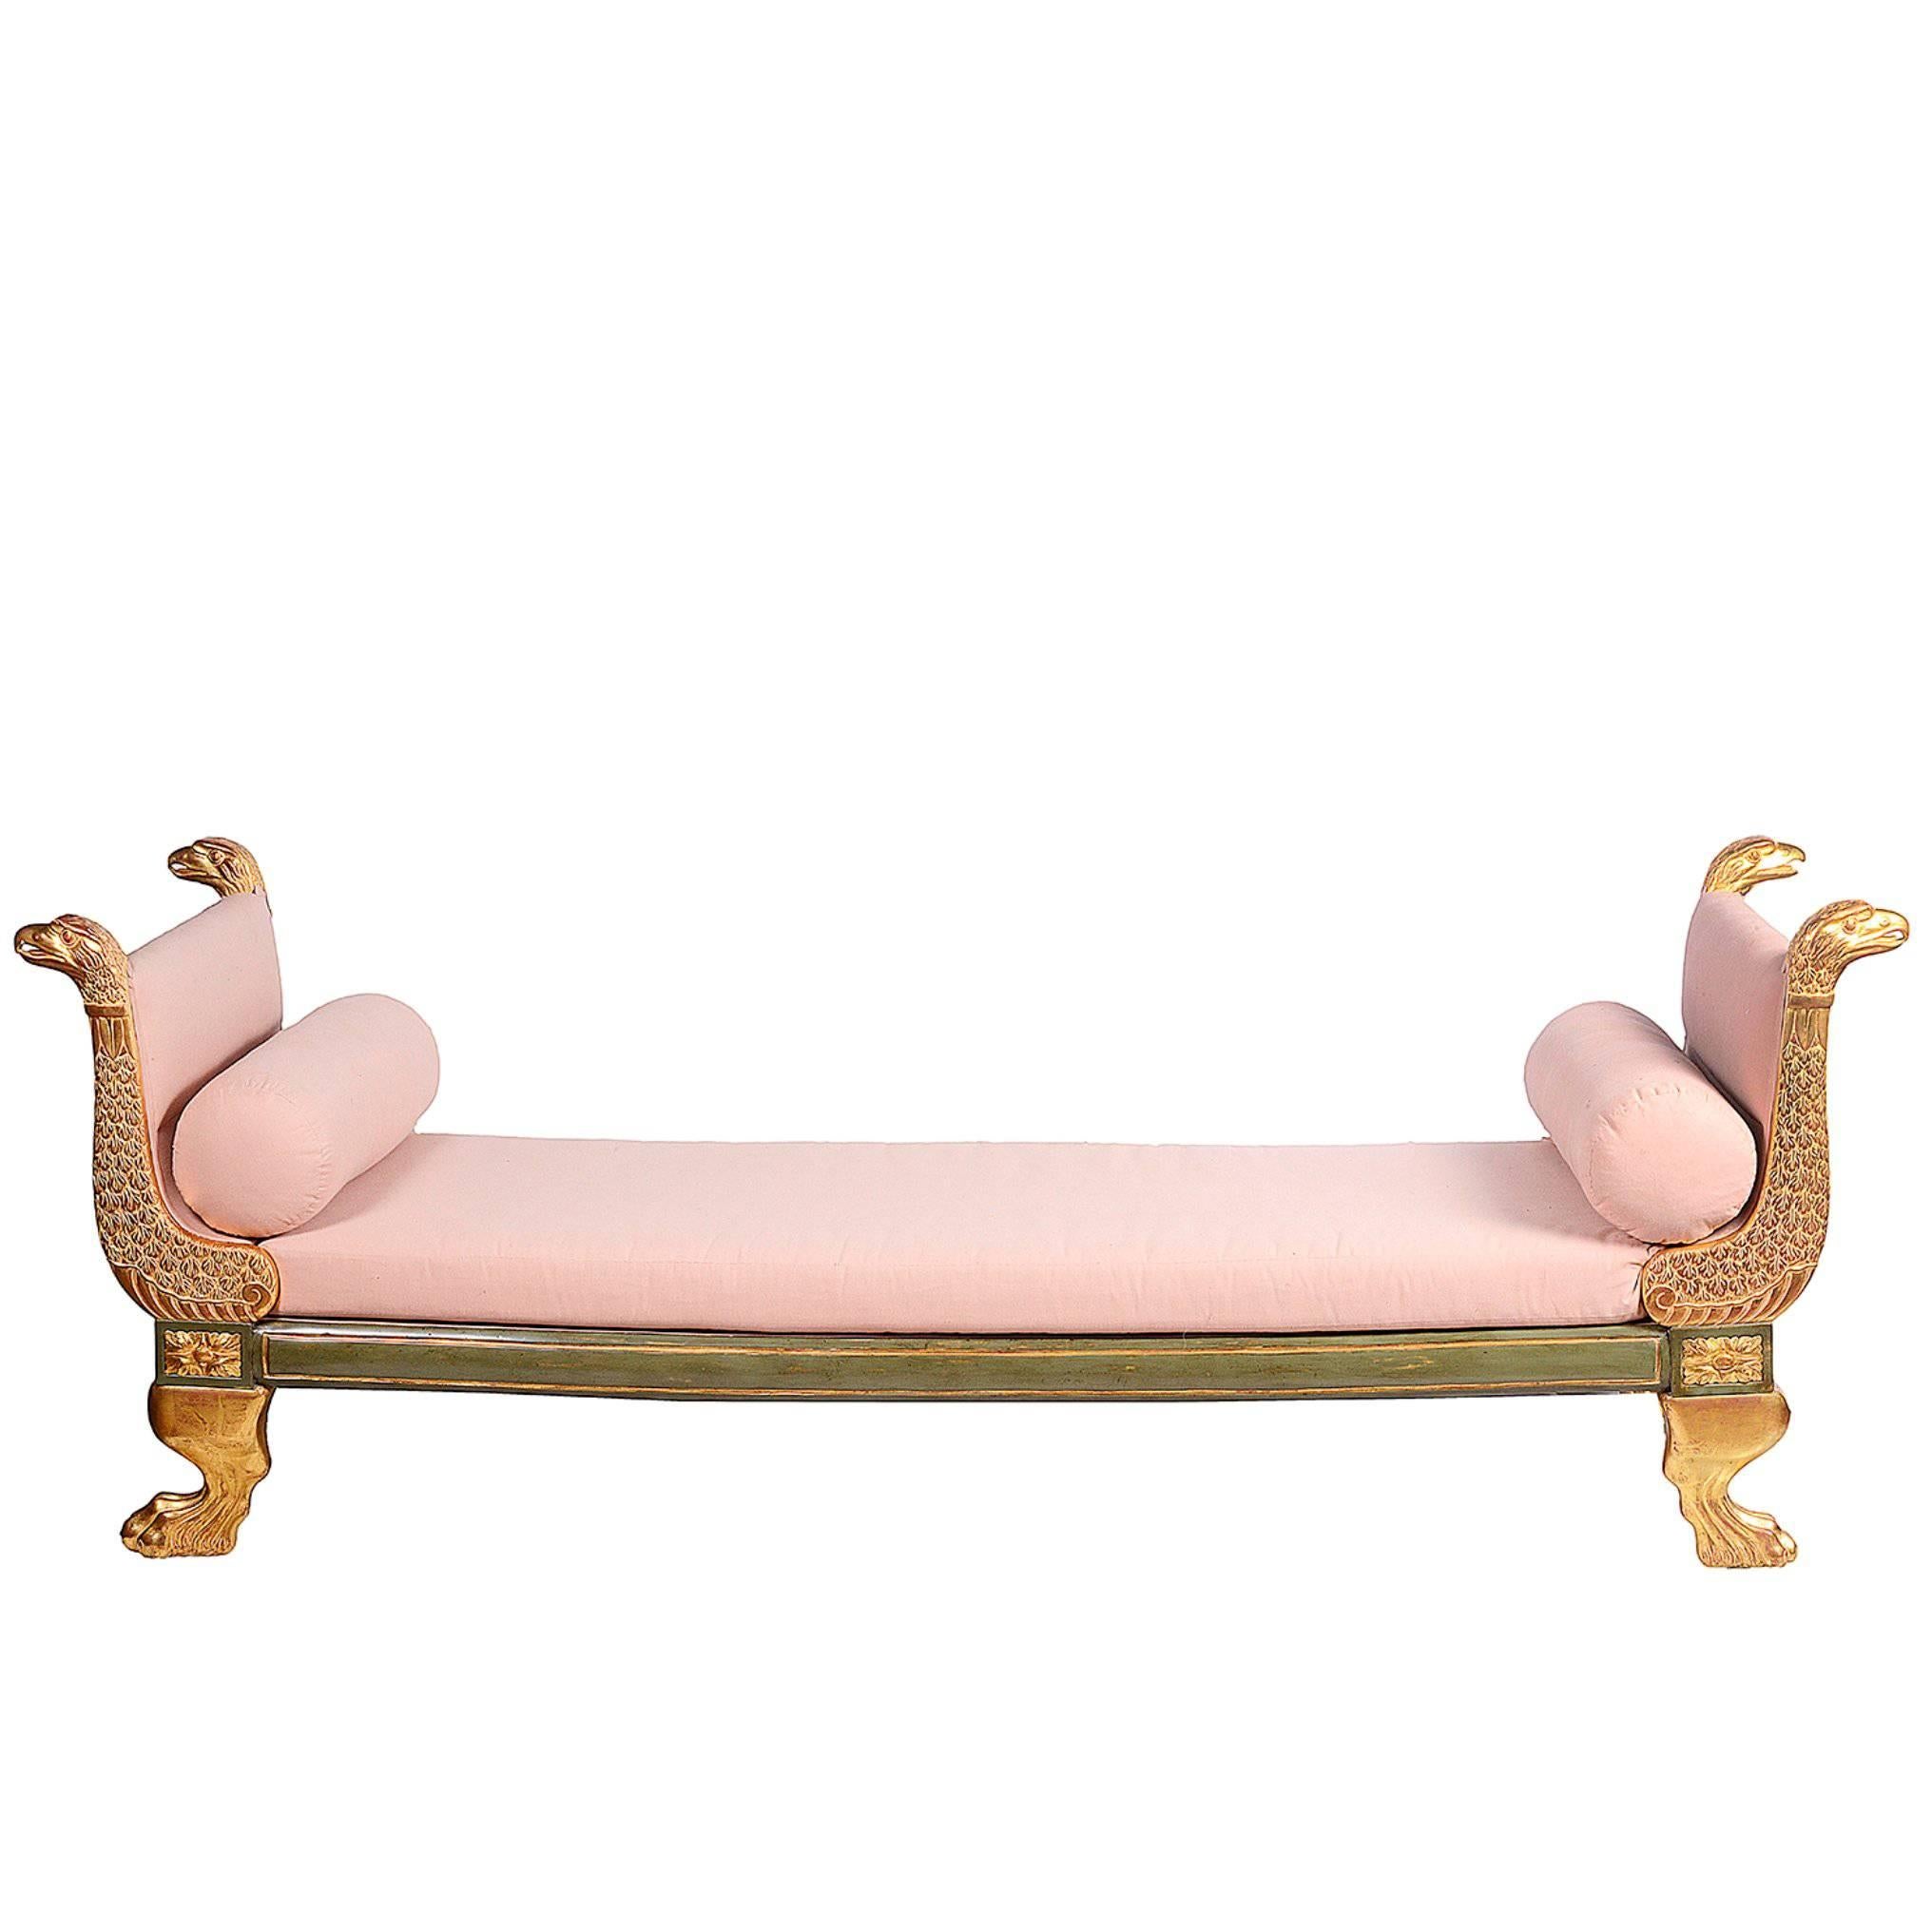 Regency Influenced Carved Giltwood Daybed For Sale